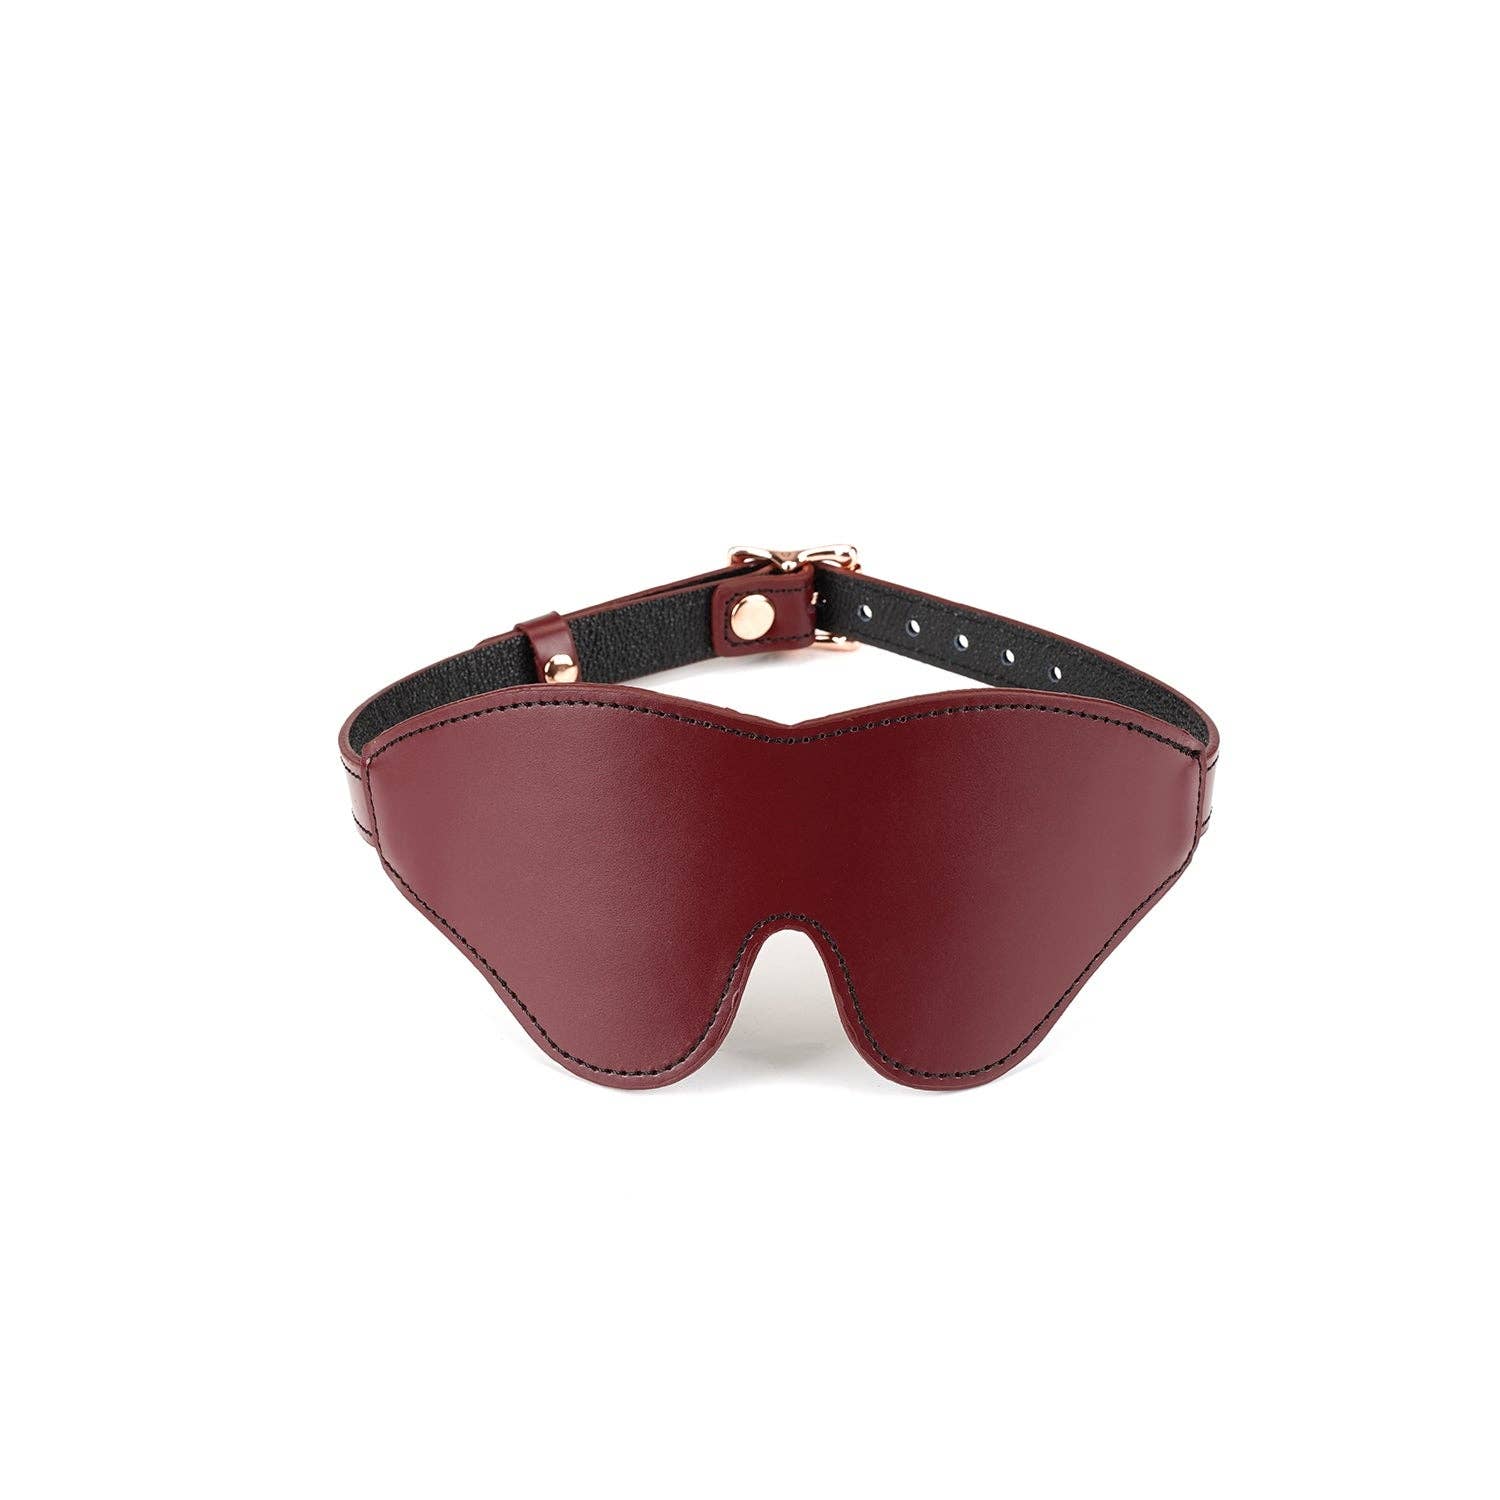 Leather Blindfold with Rose Gold Buckle - Wine